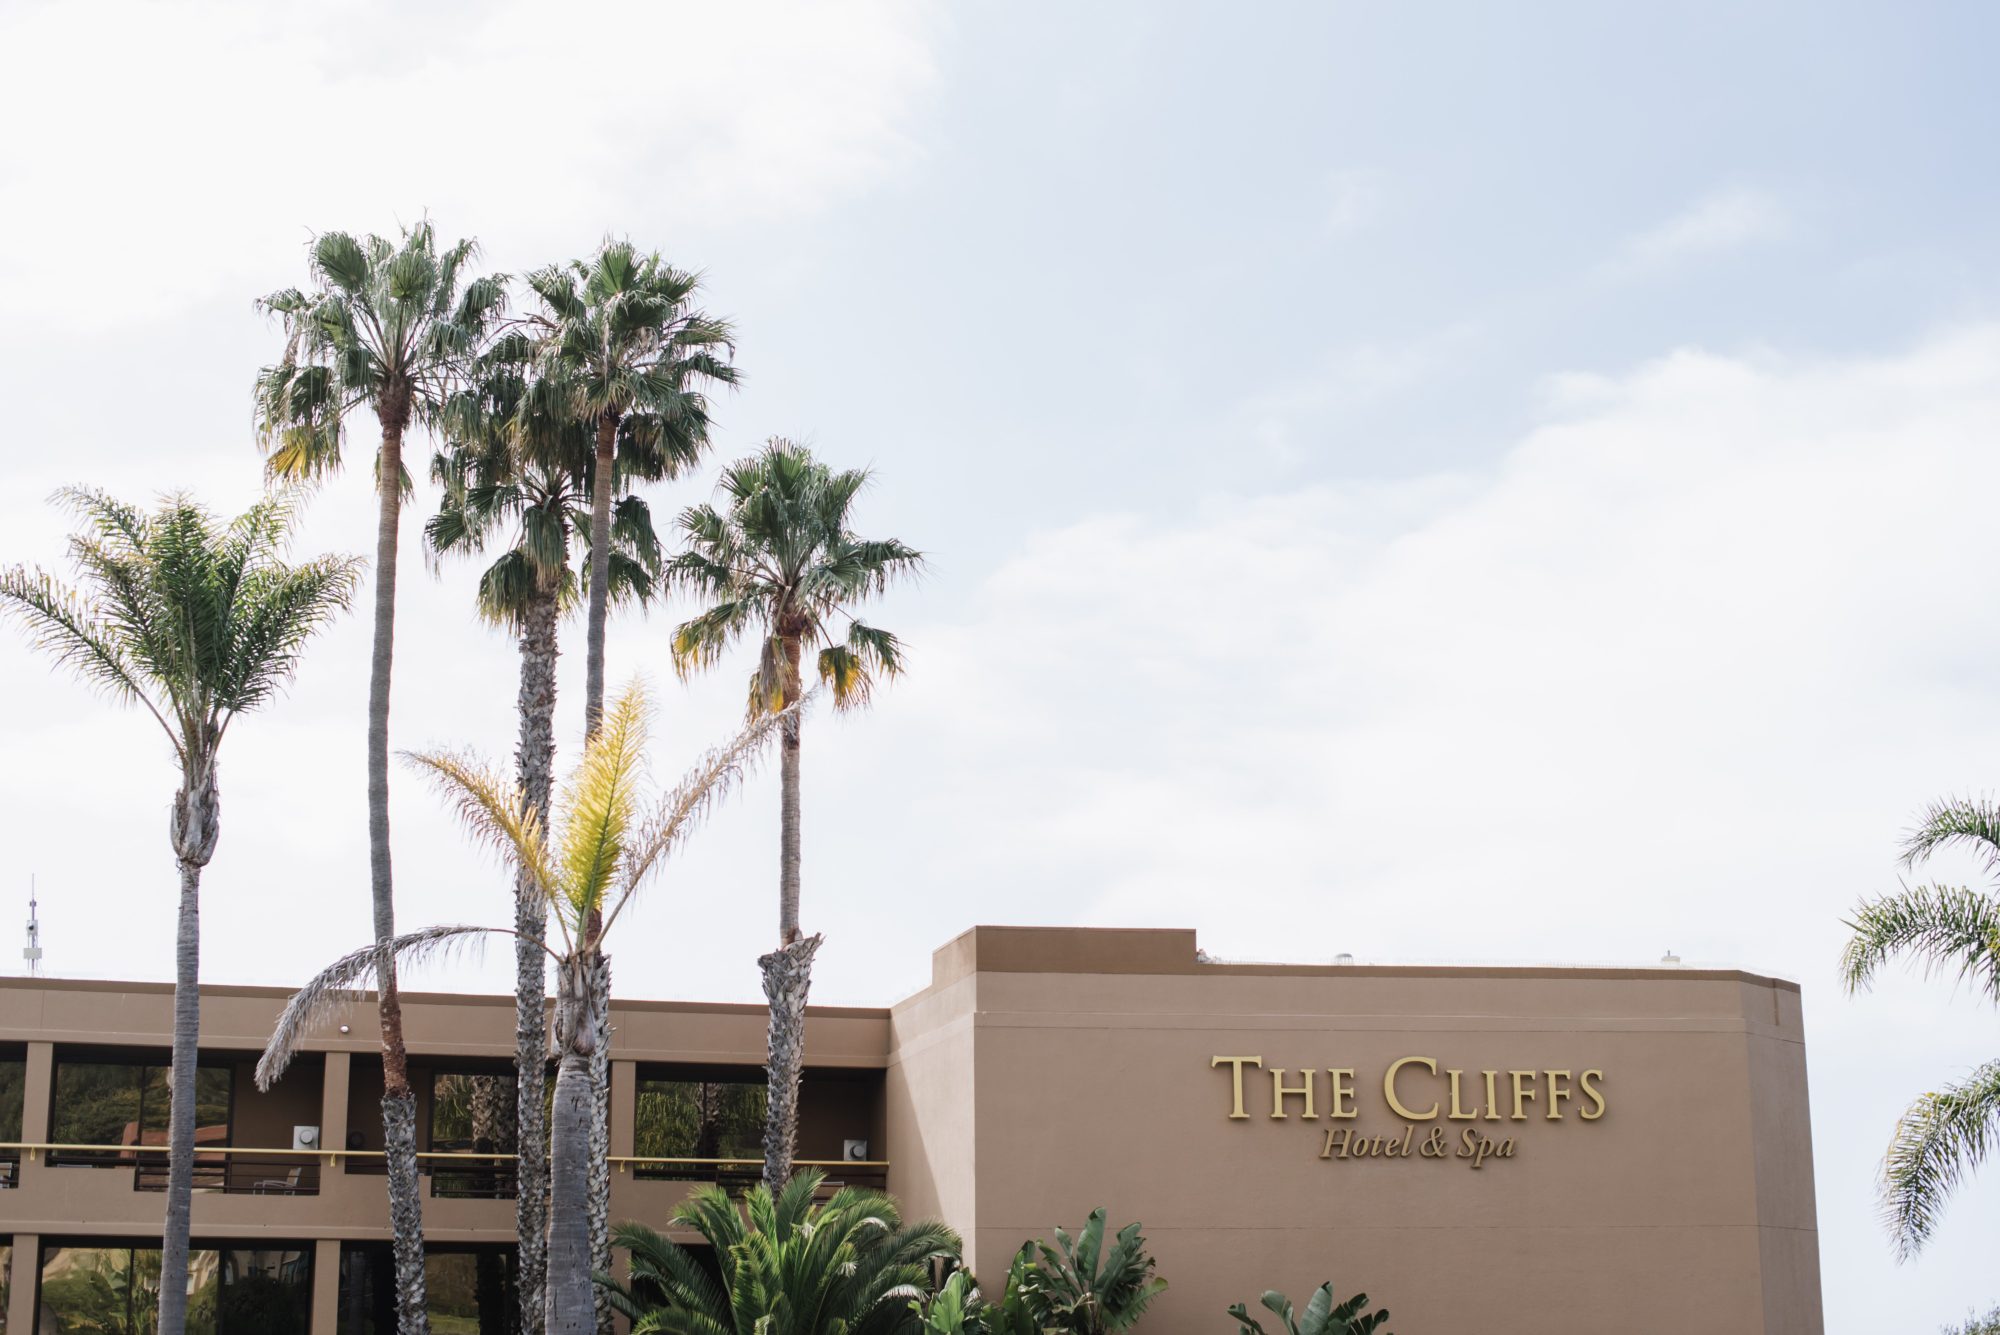 Brown building that says "The Cliffs Hotel and Spa". Palm trees are in front of building. 